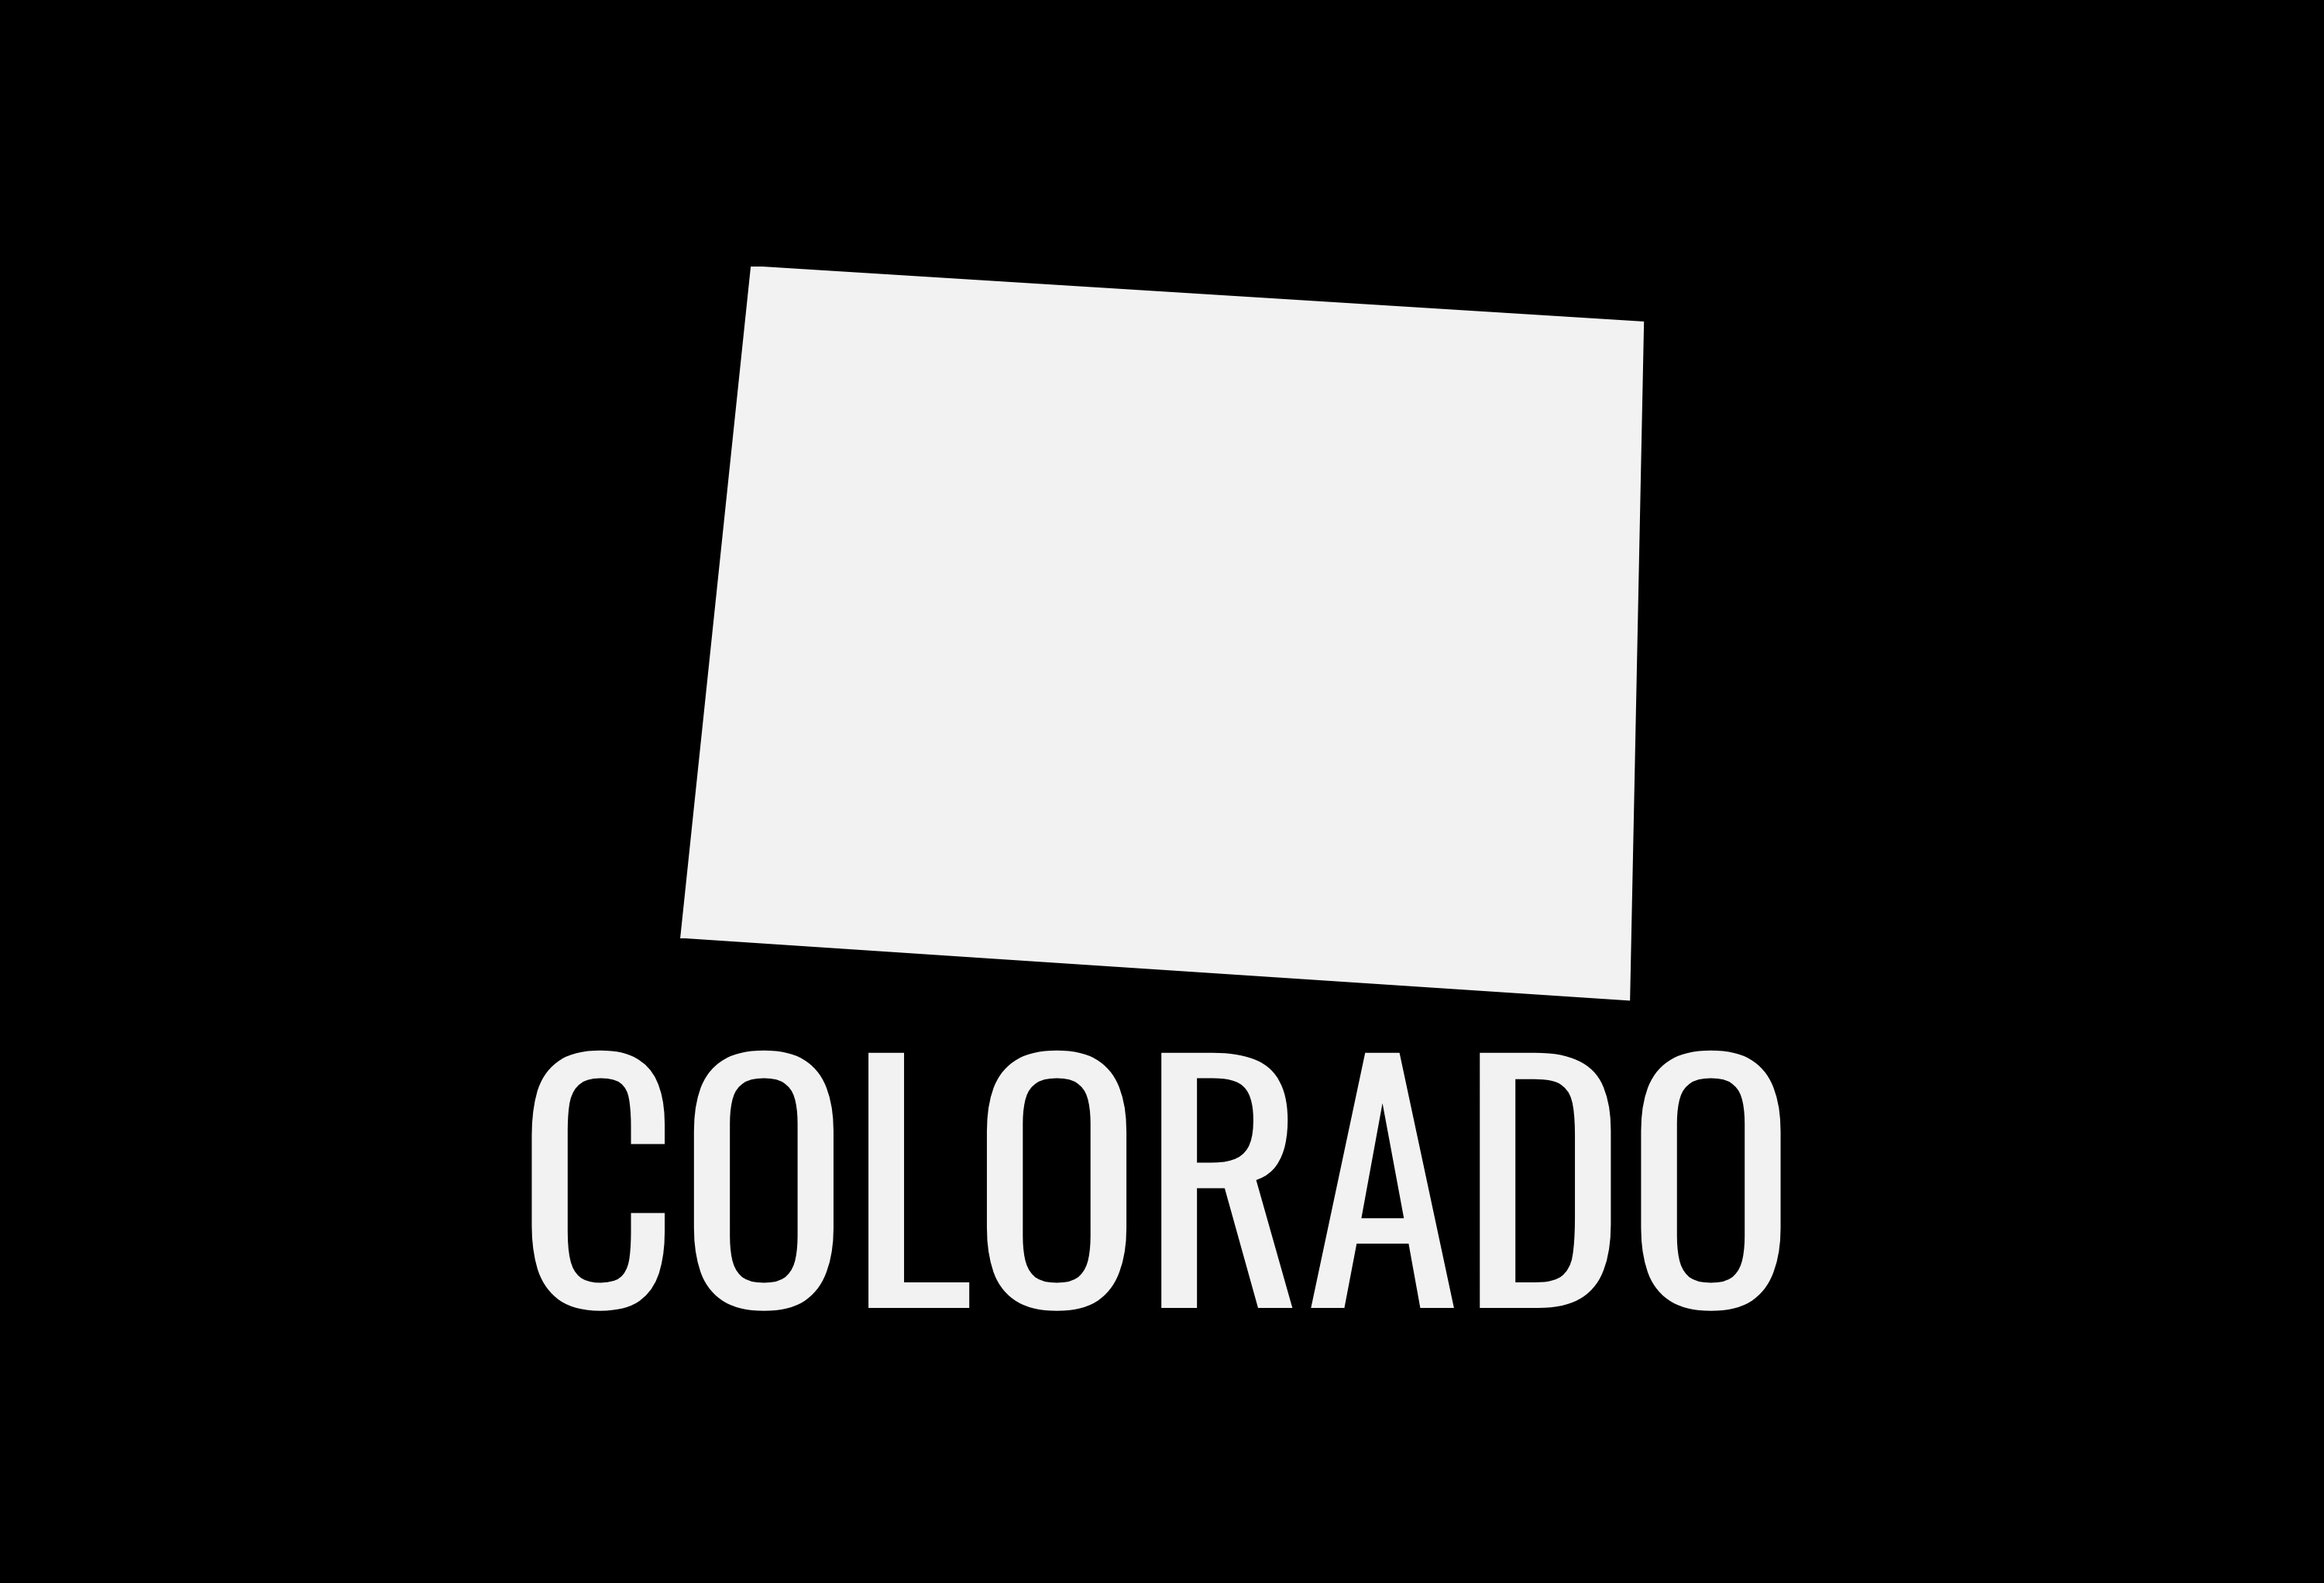 Colorado State Map Car Decal - Permanent Vinyl Sticker for Cars, Vehicle, Doors, Windows, Laptop, and more!